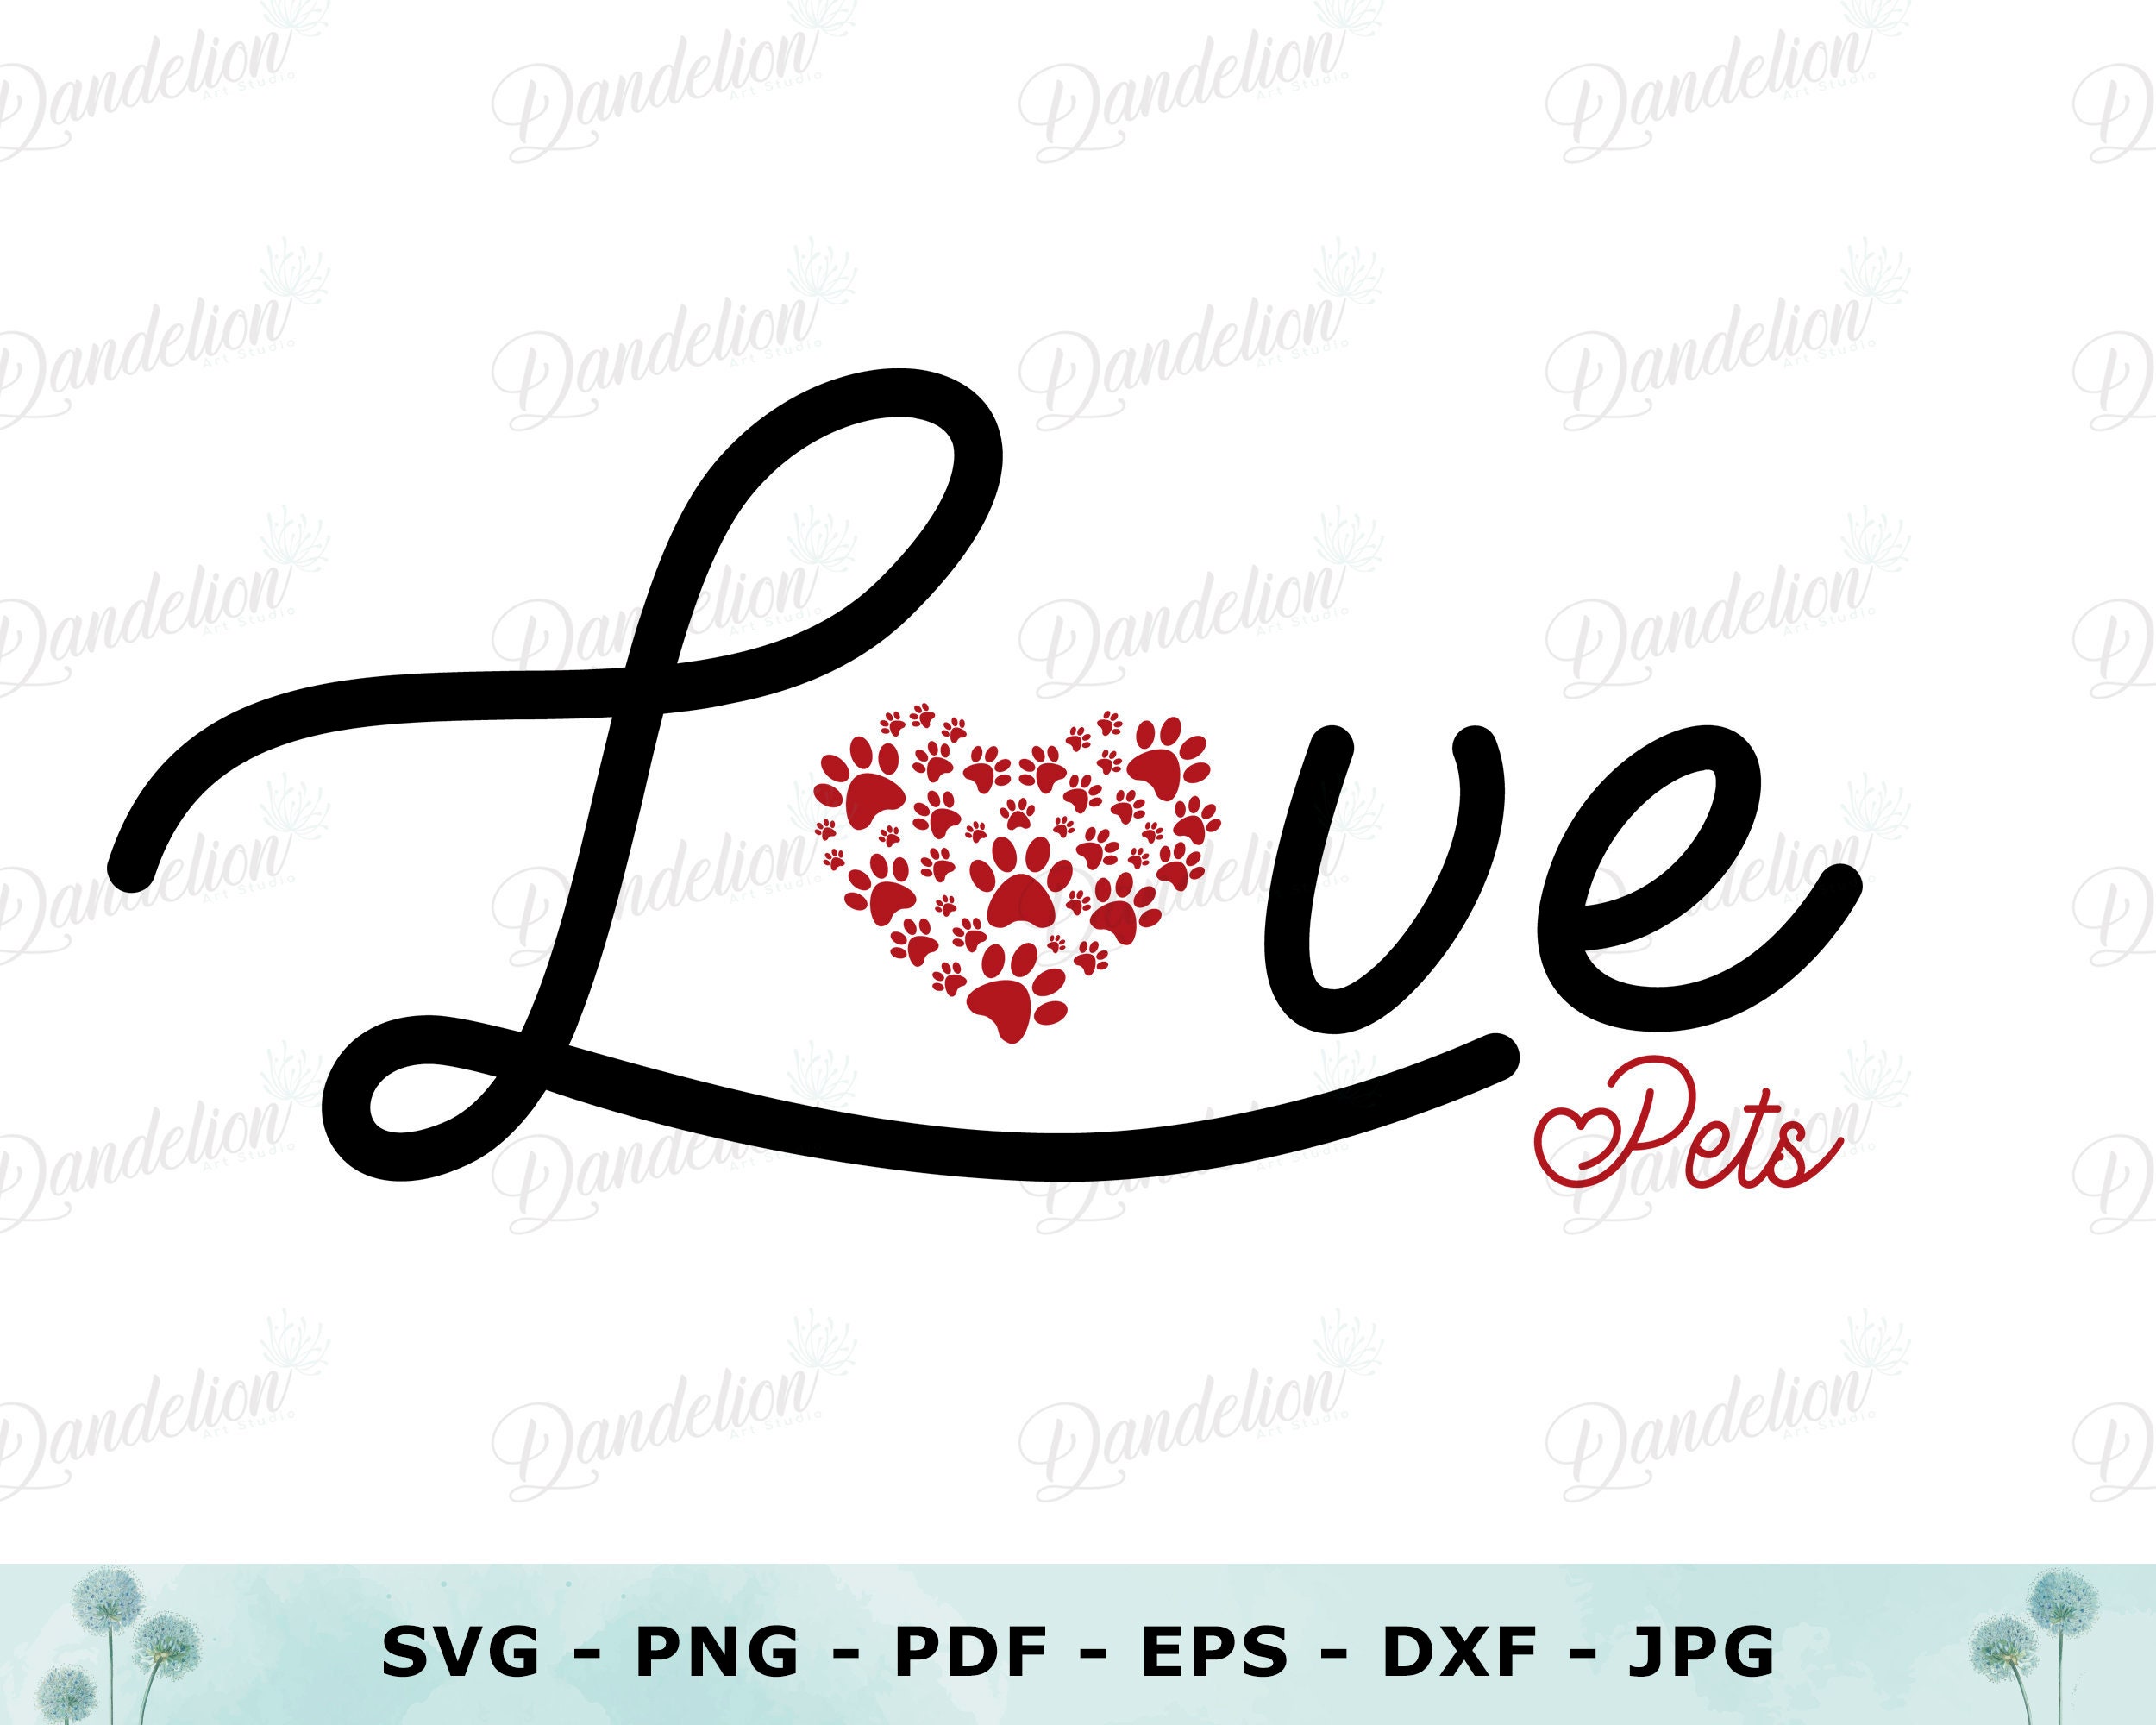 Love Pets SVG -  Pet Lover svg -  I Love Pets -  Cats -  Dogs -  Animals -  Girl Shirt -  Cut File Cricut -  Hand-lettered quotes svg -  Gift Ideas -  Love Pets